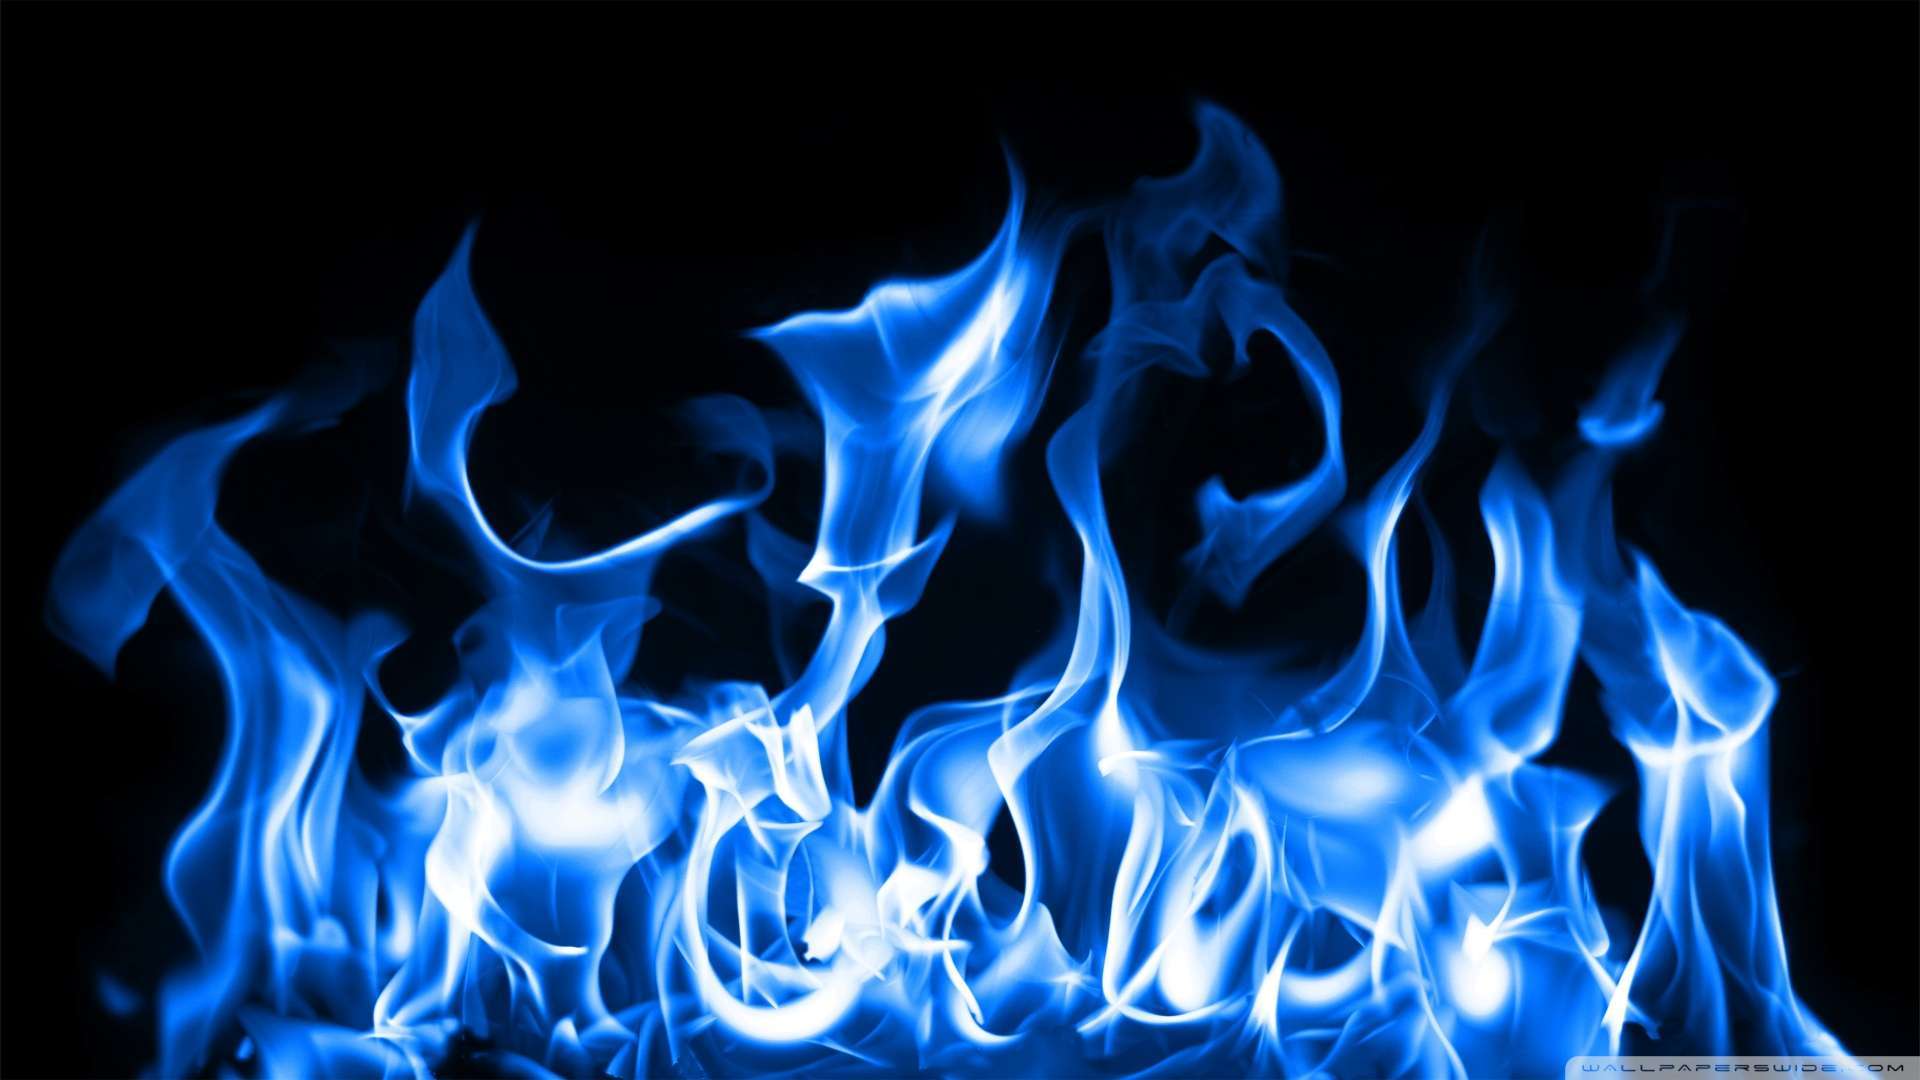 Gallery for - blue flame hd wallpapers